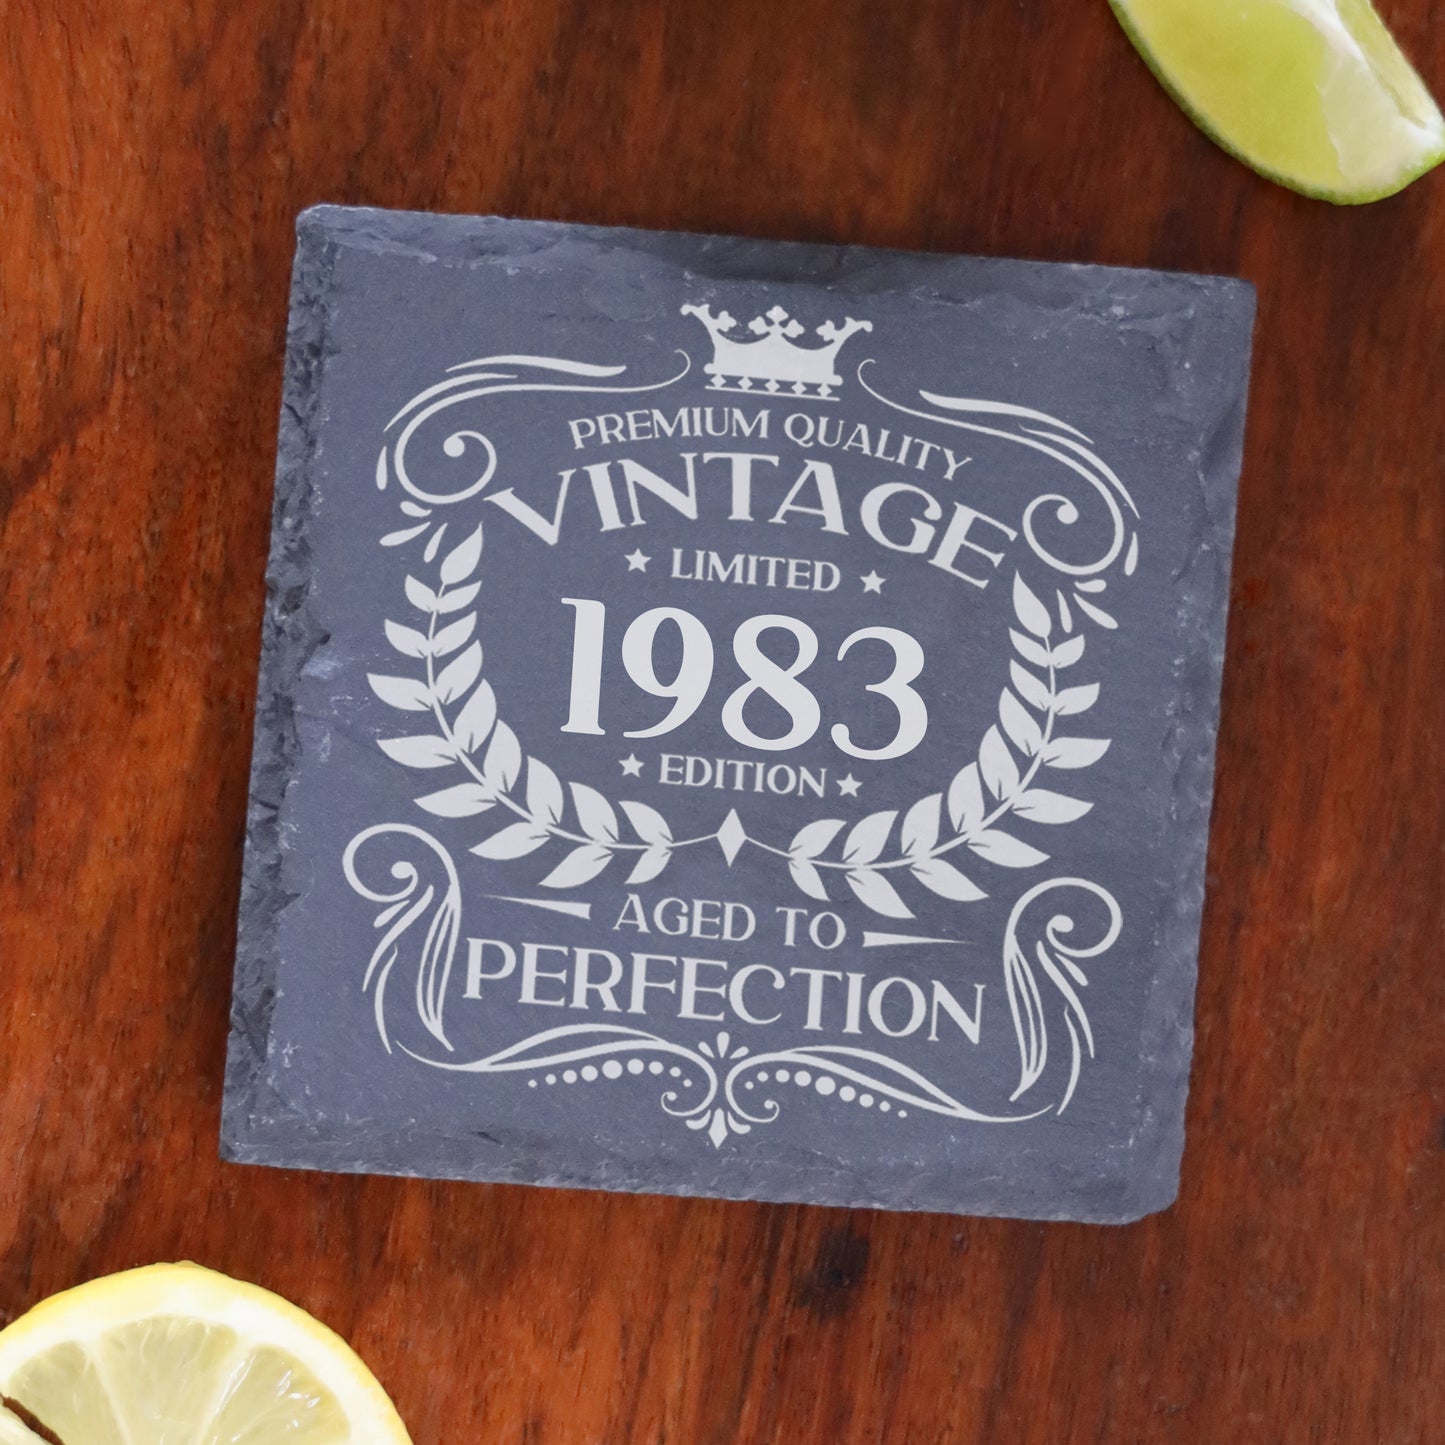 Personalised Vintage 1983 Mug and/or Coaster  - Always Looking Good - Square Coaster On Its Own  